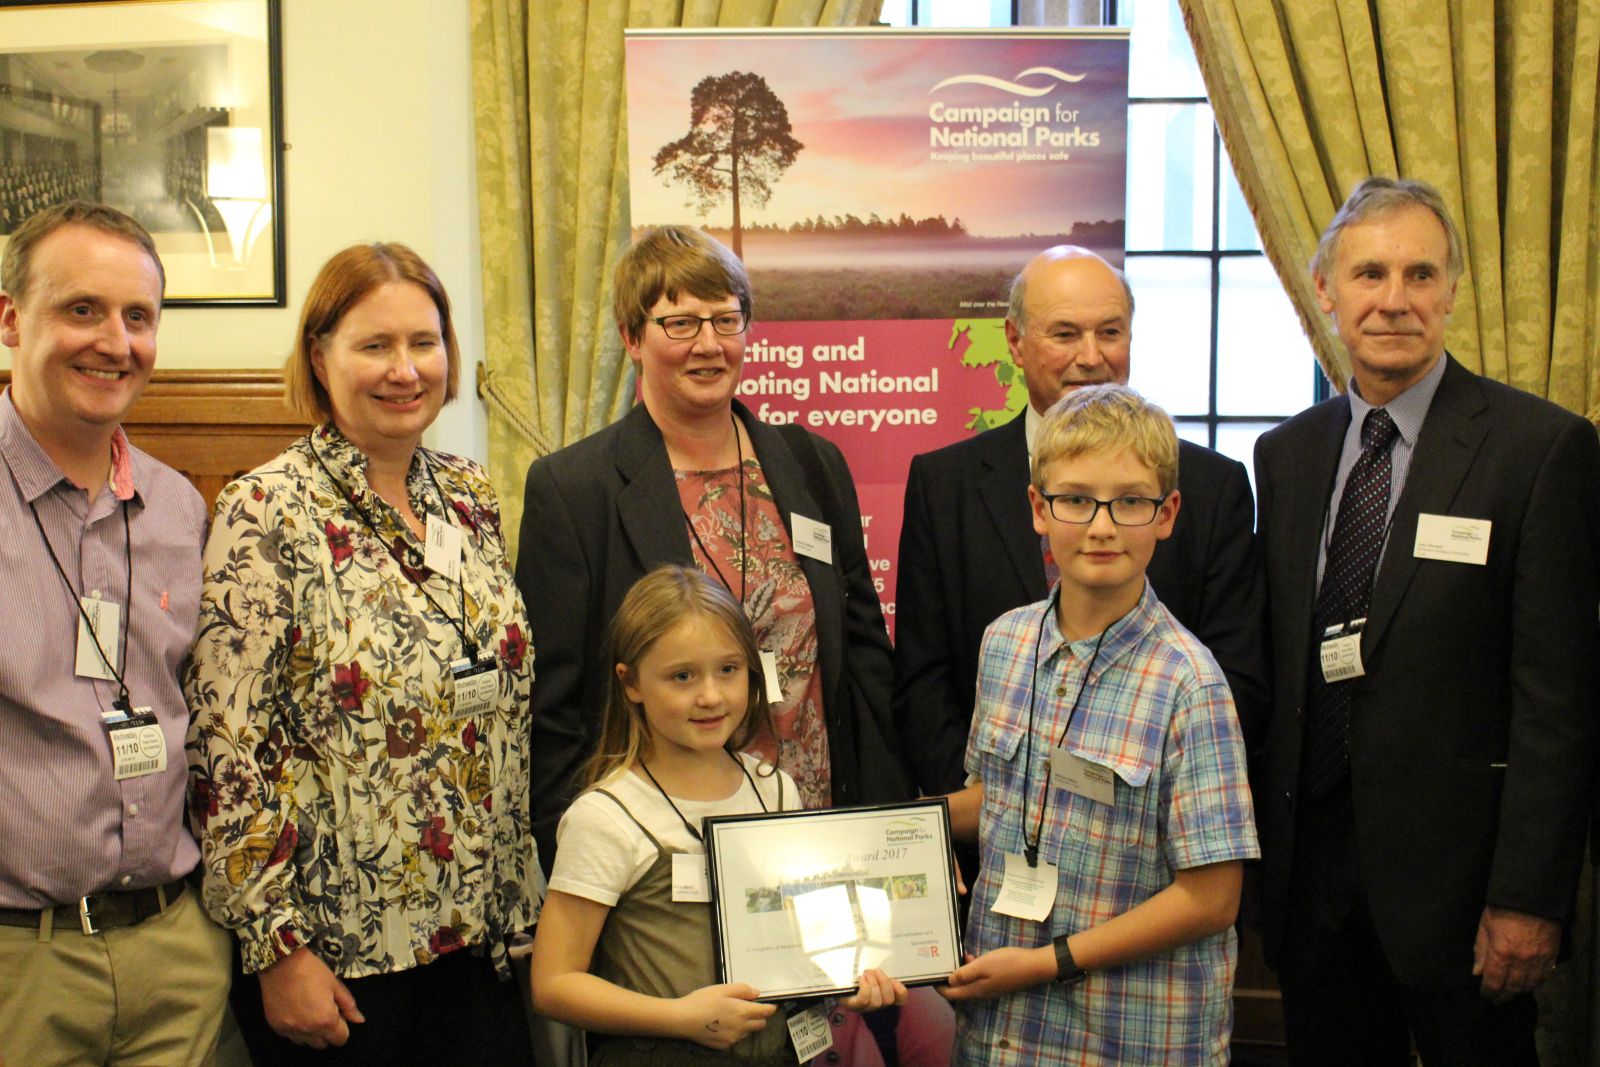 Explorers Club, North York Moors, receiving the high commendation from minister for National Parks, Lord Gardiner and John Showell the Ramblers Holidays Charitable Trust